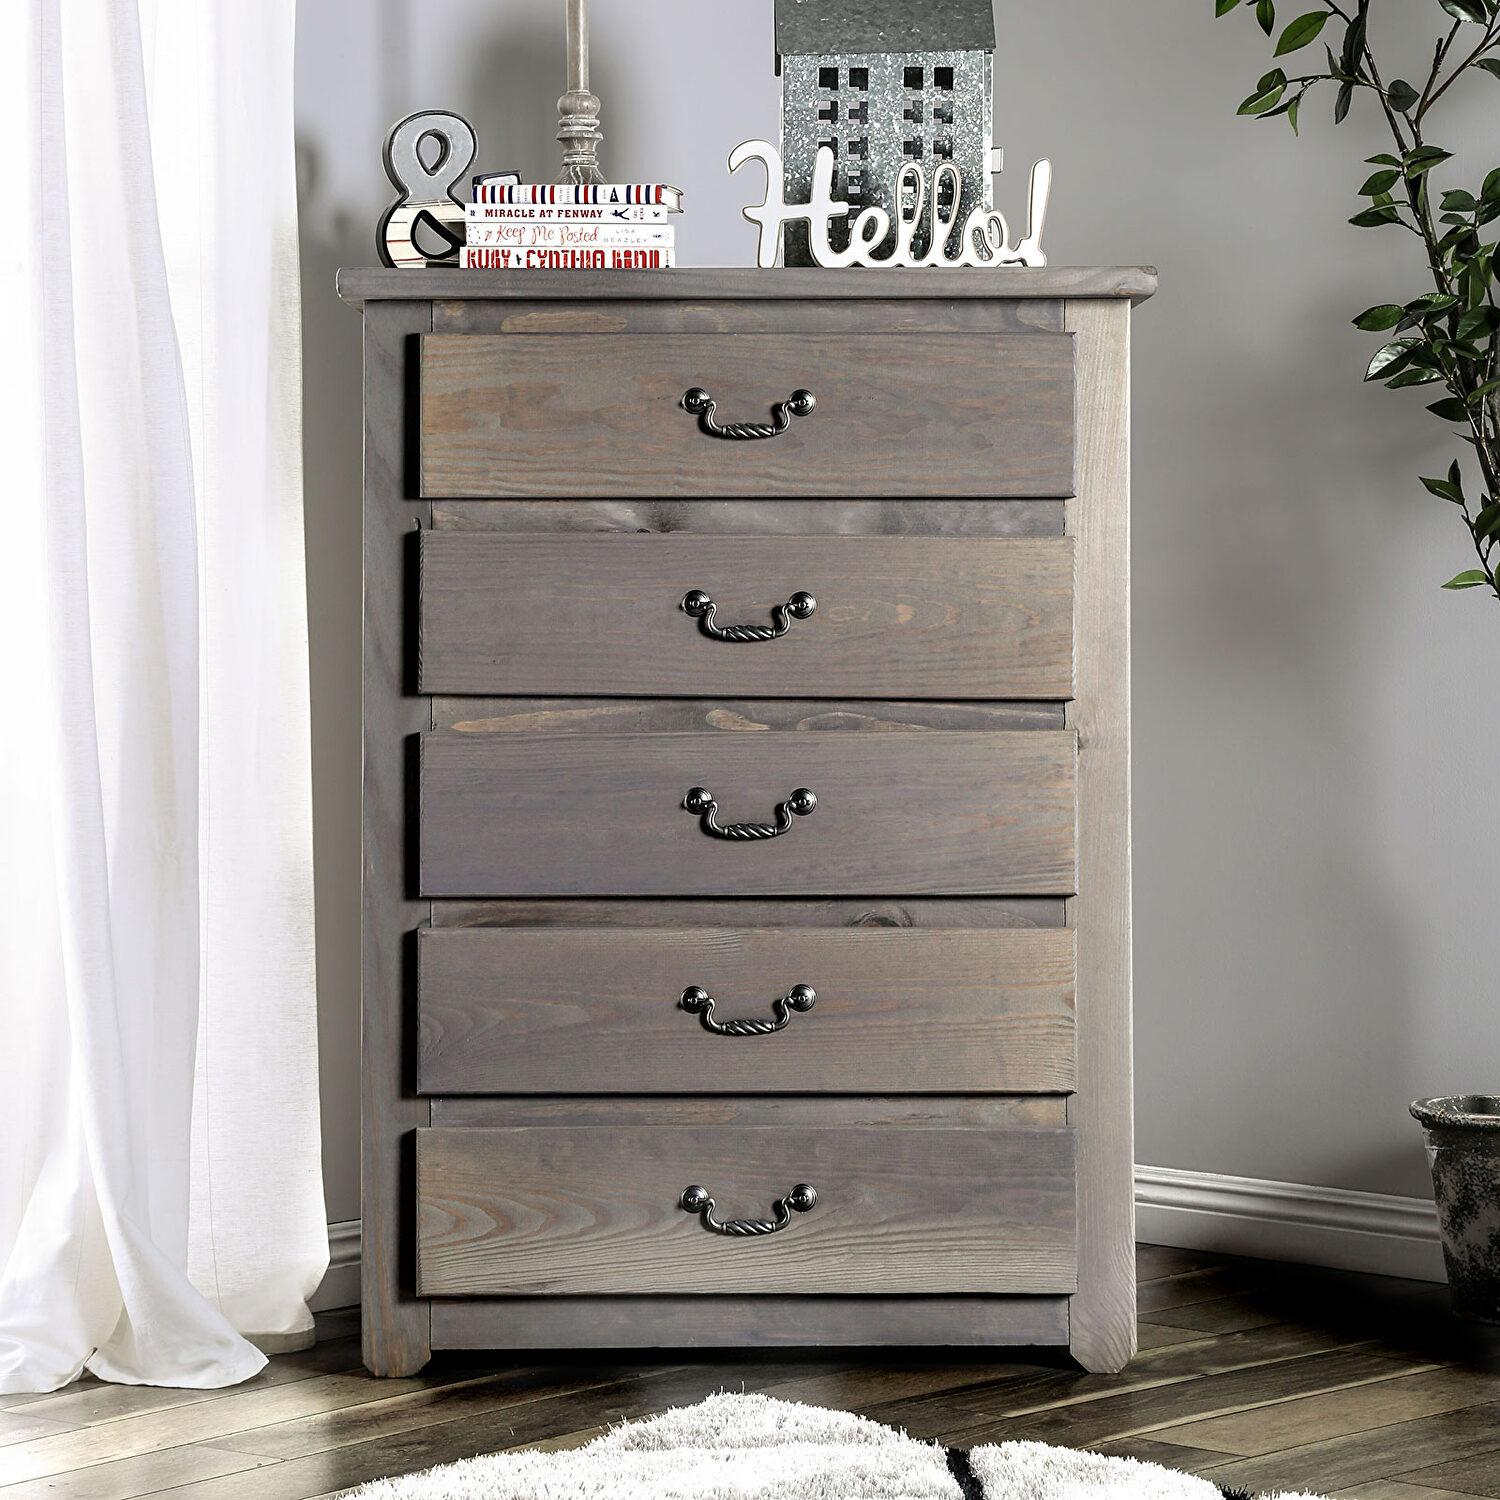 Rustic Chest AM7973C Rockwall AM7973C in Gray 